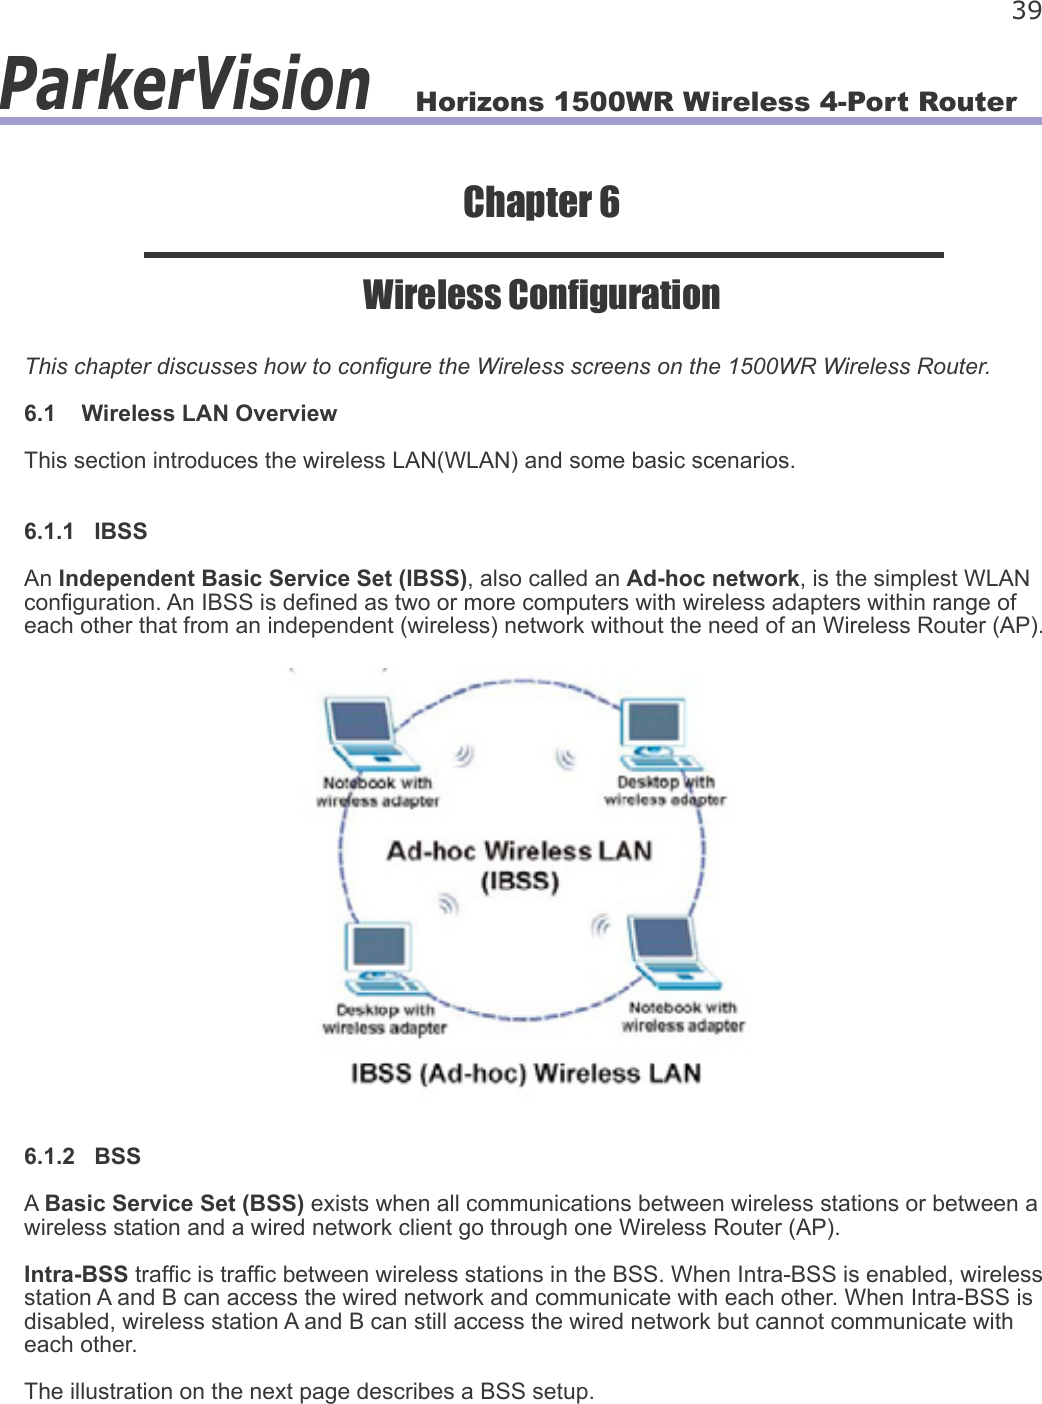 Horizons 1500WR Wireless 4-Port Router 39ParkerVisionChapter 6Wireless CongurationThis chapter discusses how to congure the Wireless screens on the 1500WR Wireless Router.6.1    Wireless LAN OverviewThis section introduces the wireless LAN(WLAN) and some basic scenarios.6.1.1   IBSSAn Independent Basic Service Set (IBSS), also called an Ad-hoc network, is the simplest WLAN conguration. An IBSS is dened as two or more computers with wireless adapters within range of each other that from an independent (wireless) network without the need of an Wireless Router (AP).6.1.2   BSSA Basic Service Set (BSS) exists when all communications between wireless stations or between a wireless station and a wired network client go through one Wireless Router (AP).Intra-BSS trafc is trafc between wireless stations in the BSS. When Intra-BSS is enabled, wireless station A and B can access the wired network and communicate with each other. When Intra-BSS is disabled, wireless station A and B can still access the wired network but cannot communicate with each other.The illustration on the next page describes a BSS setup.